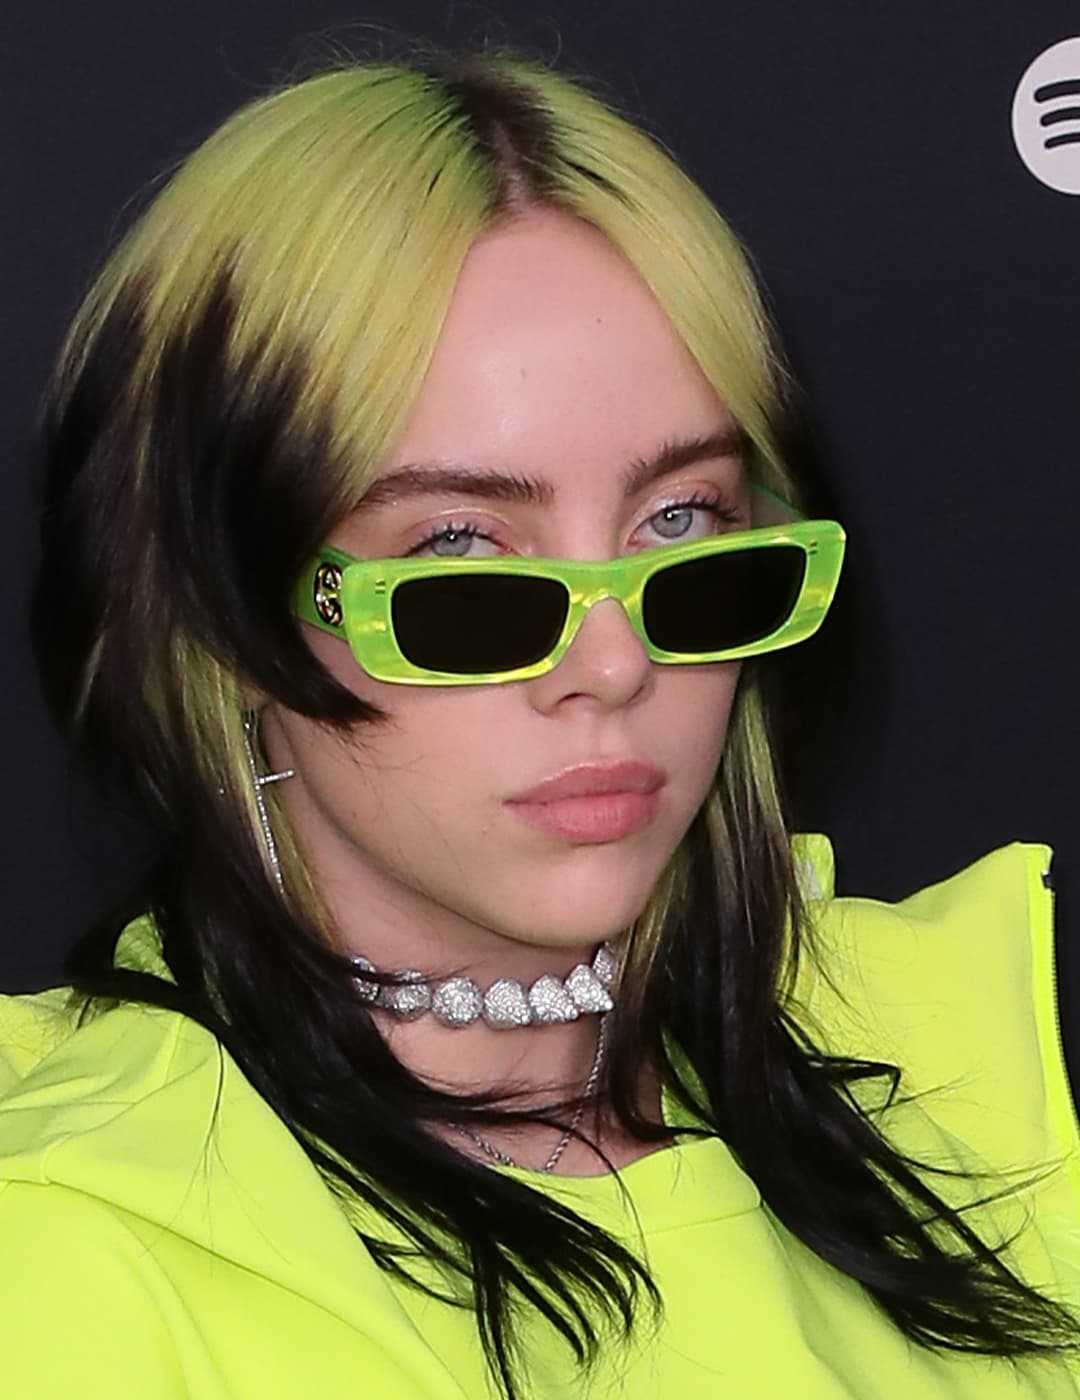 A photo of Billie Eillish with her iconic neon green look